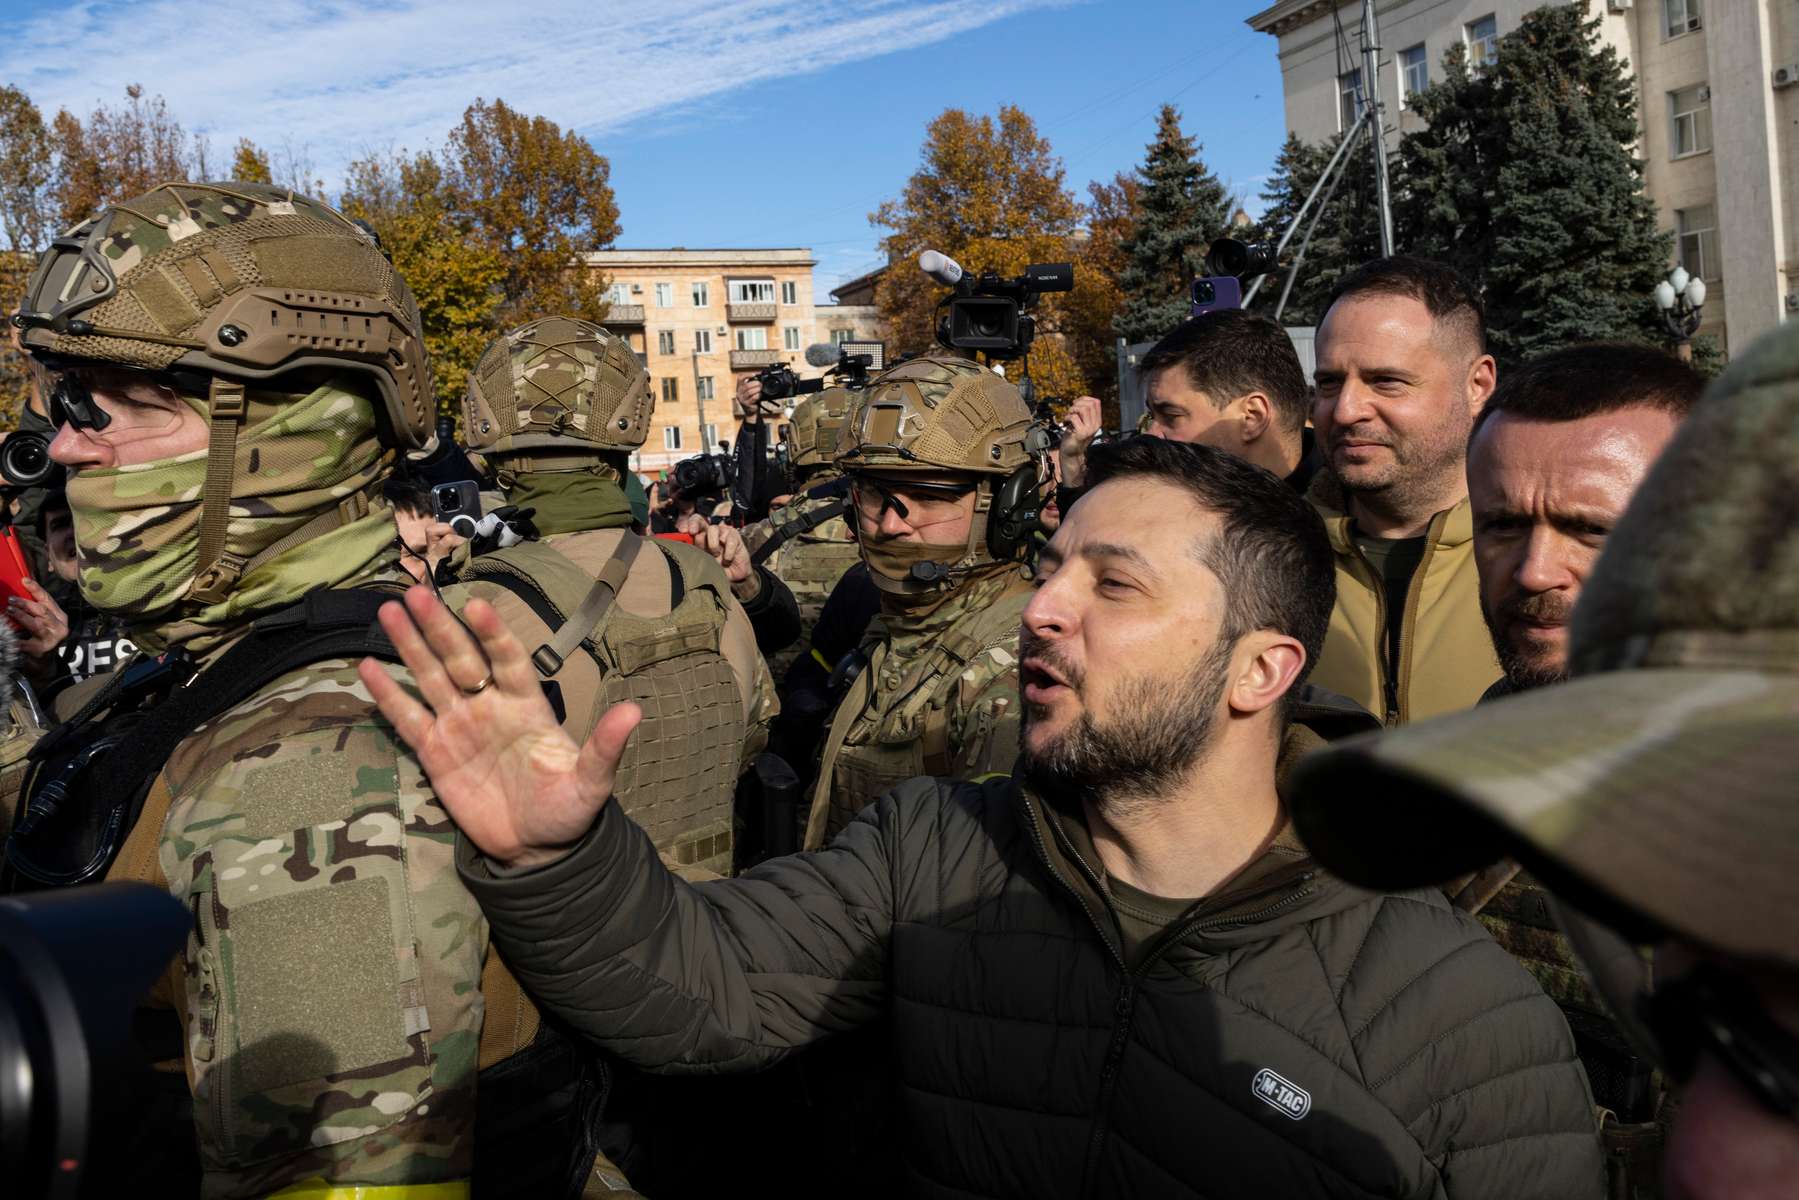 KHERSON, UKRAINE - Ukraine President Volodymyr Zelenksy makes a surprise visit to Kherson on November 14, 2022 in Kherson, Ukraine. Zelensky wanted to offer support to residents of the liberated city occupied by Russian for over 8 months.  (Photo by Paula Bronstein /Getty Images)